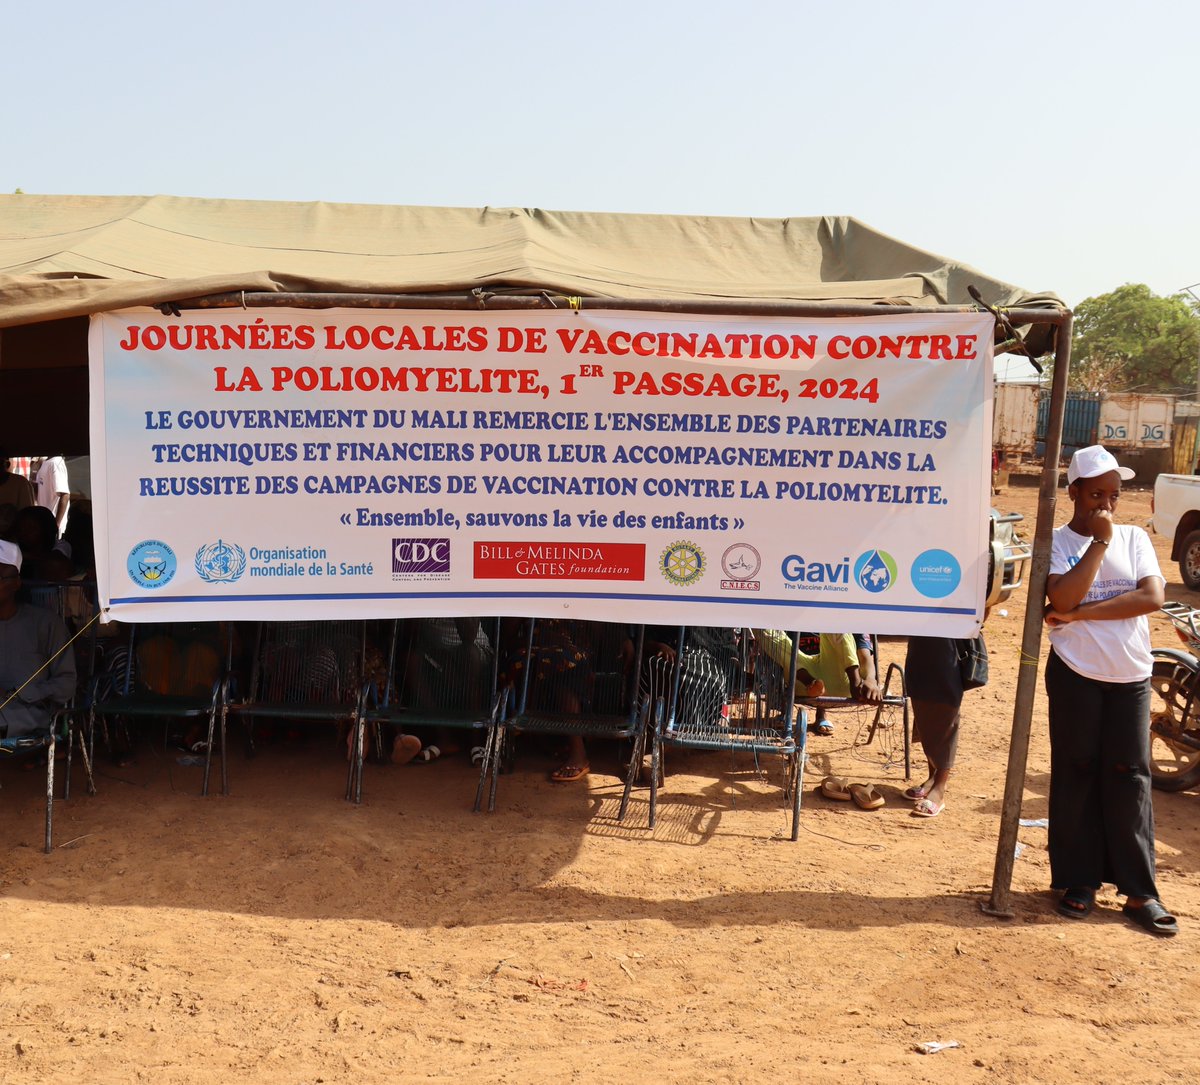 The #Polio campaign kicks off with a strong start in #Mali. In Kita, authorities launched the campaign. For 4 days, @MSDS_Mali, @UNICEF, @omsmali, @gavi and other partners are joining forces to vaccinate +4 million children against this preventable disease. #ForEveryChild